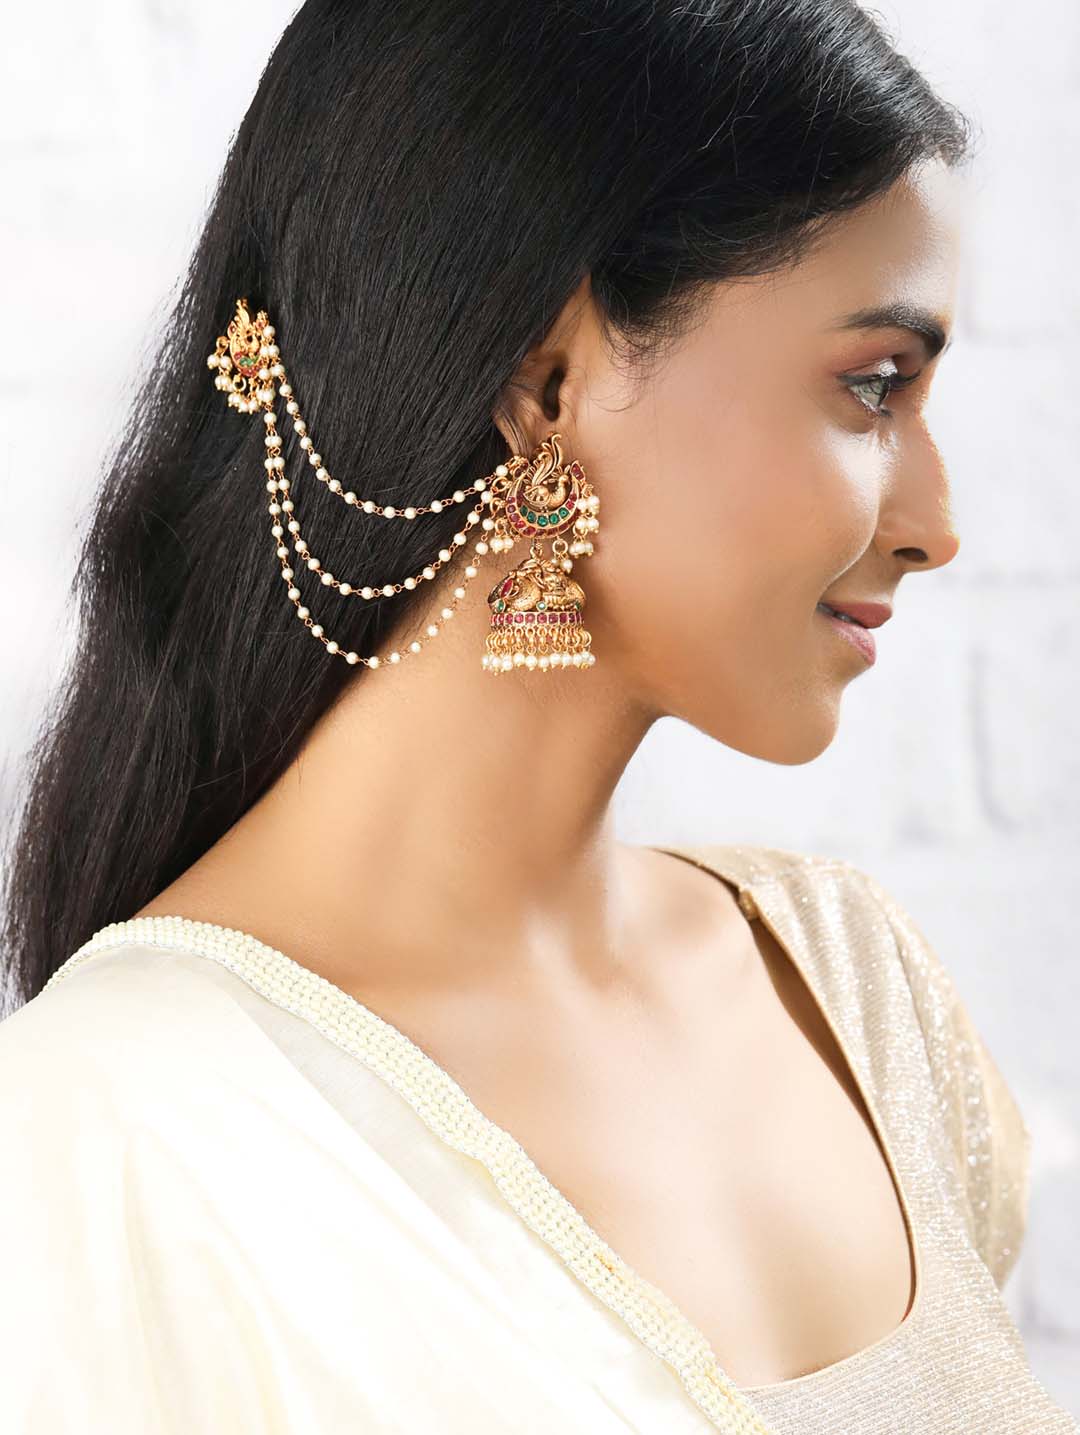 Gold Earring with Hair Chain, traditional Rajasthani ghungroo jhumka with  supporting Ear Chain or Kaan Sahara | Ear chain, Hair chains, Simple  earrings